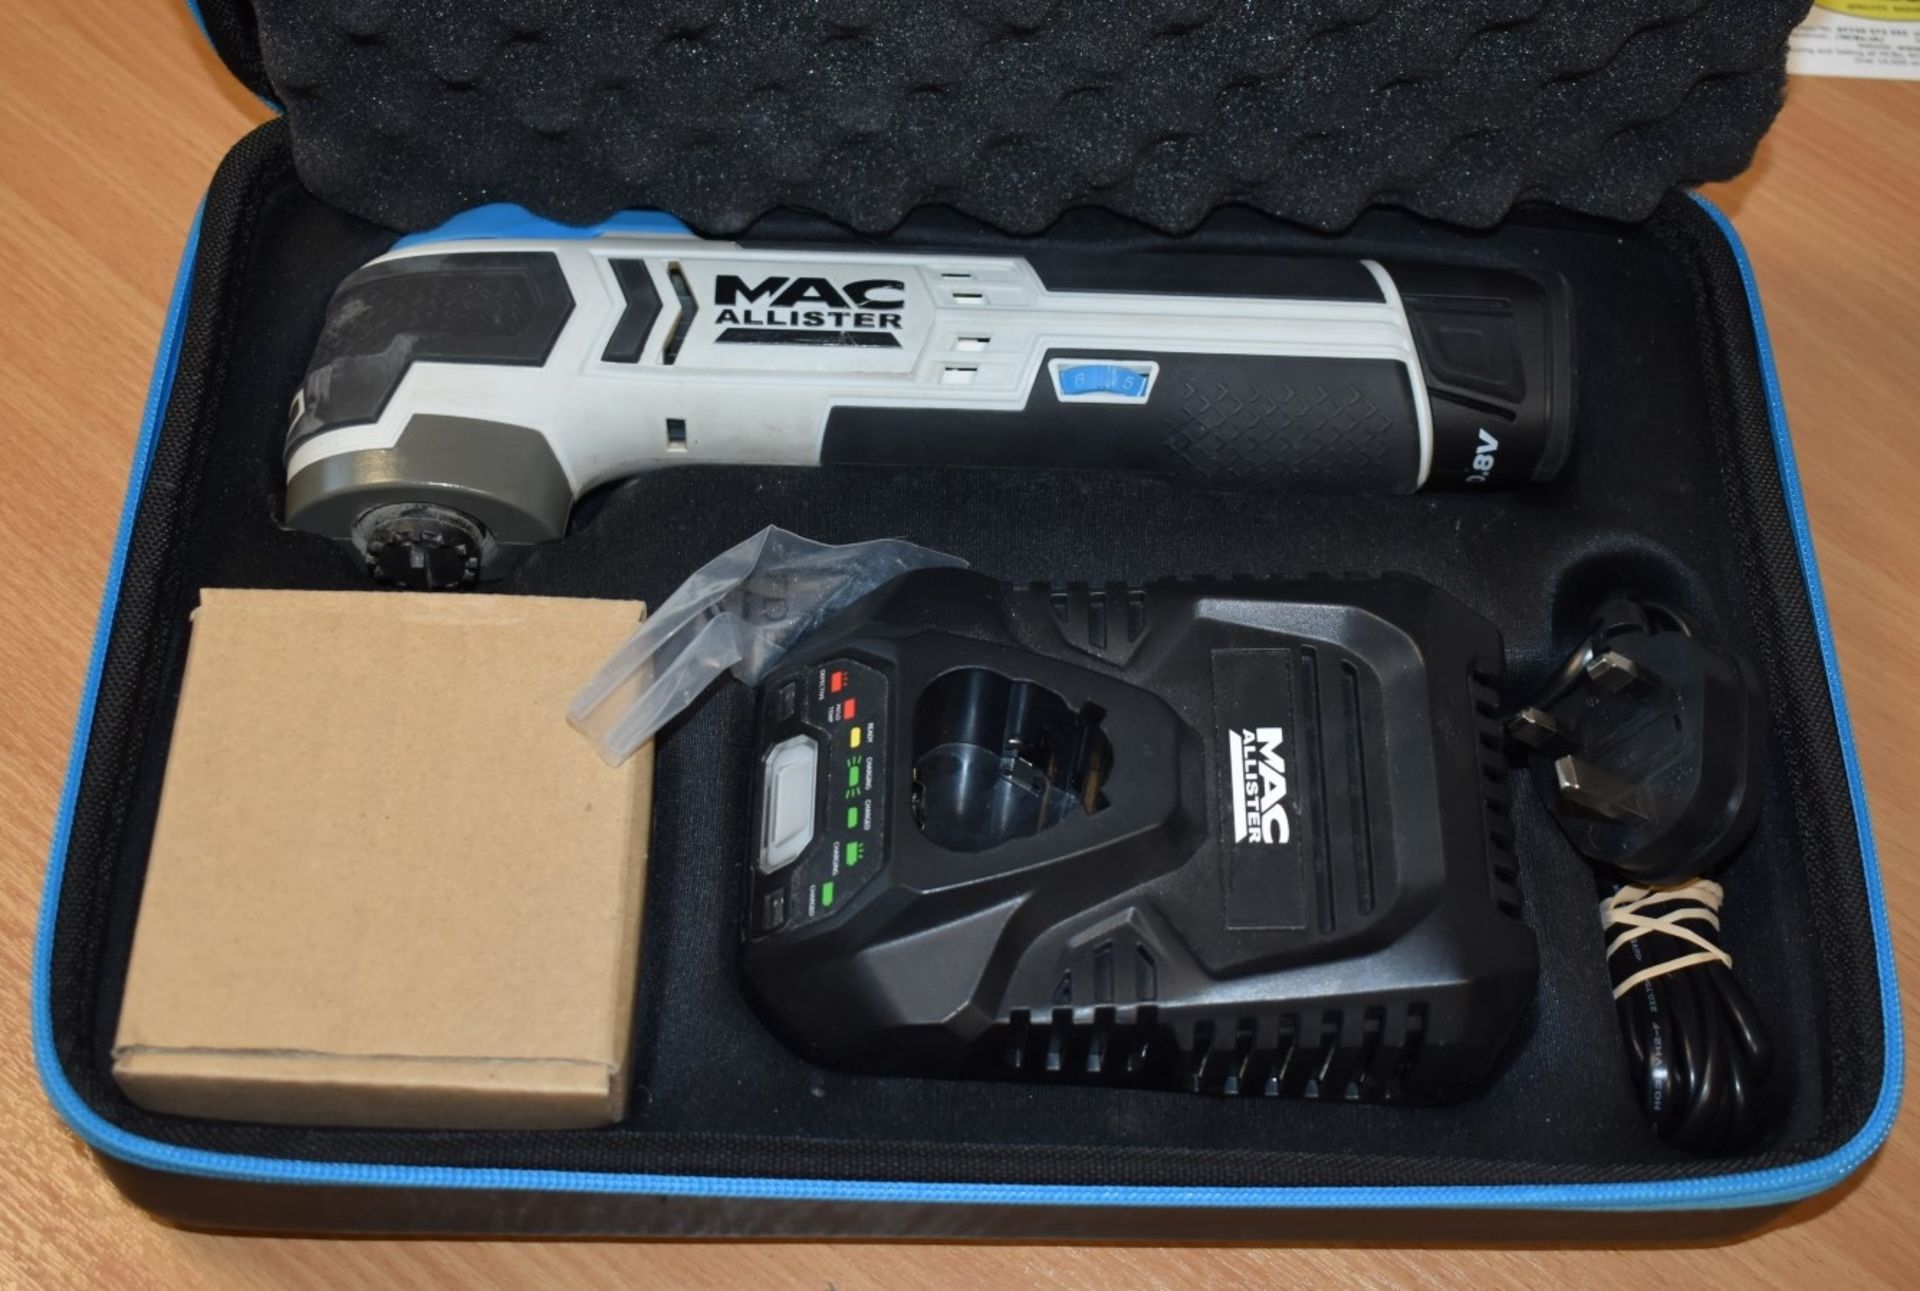 1 x Mac Allister 10.8v 90w Cordless Multi Tool With Case and Accessories Type MEMT108LI